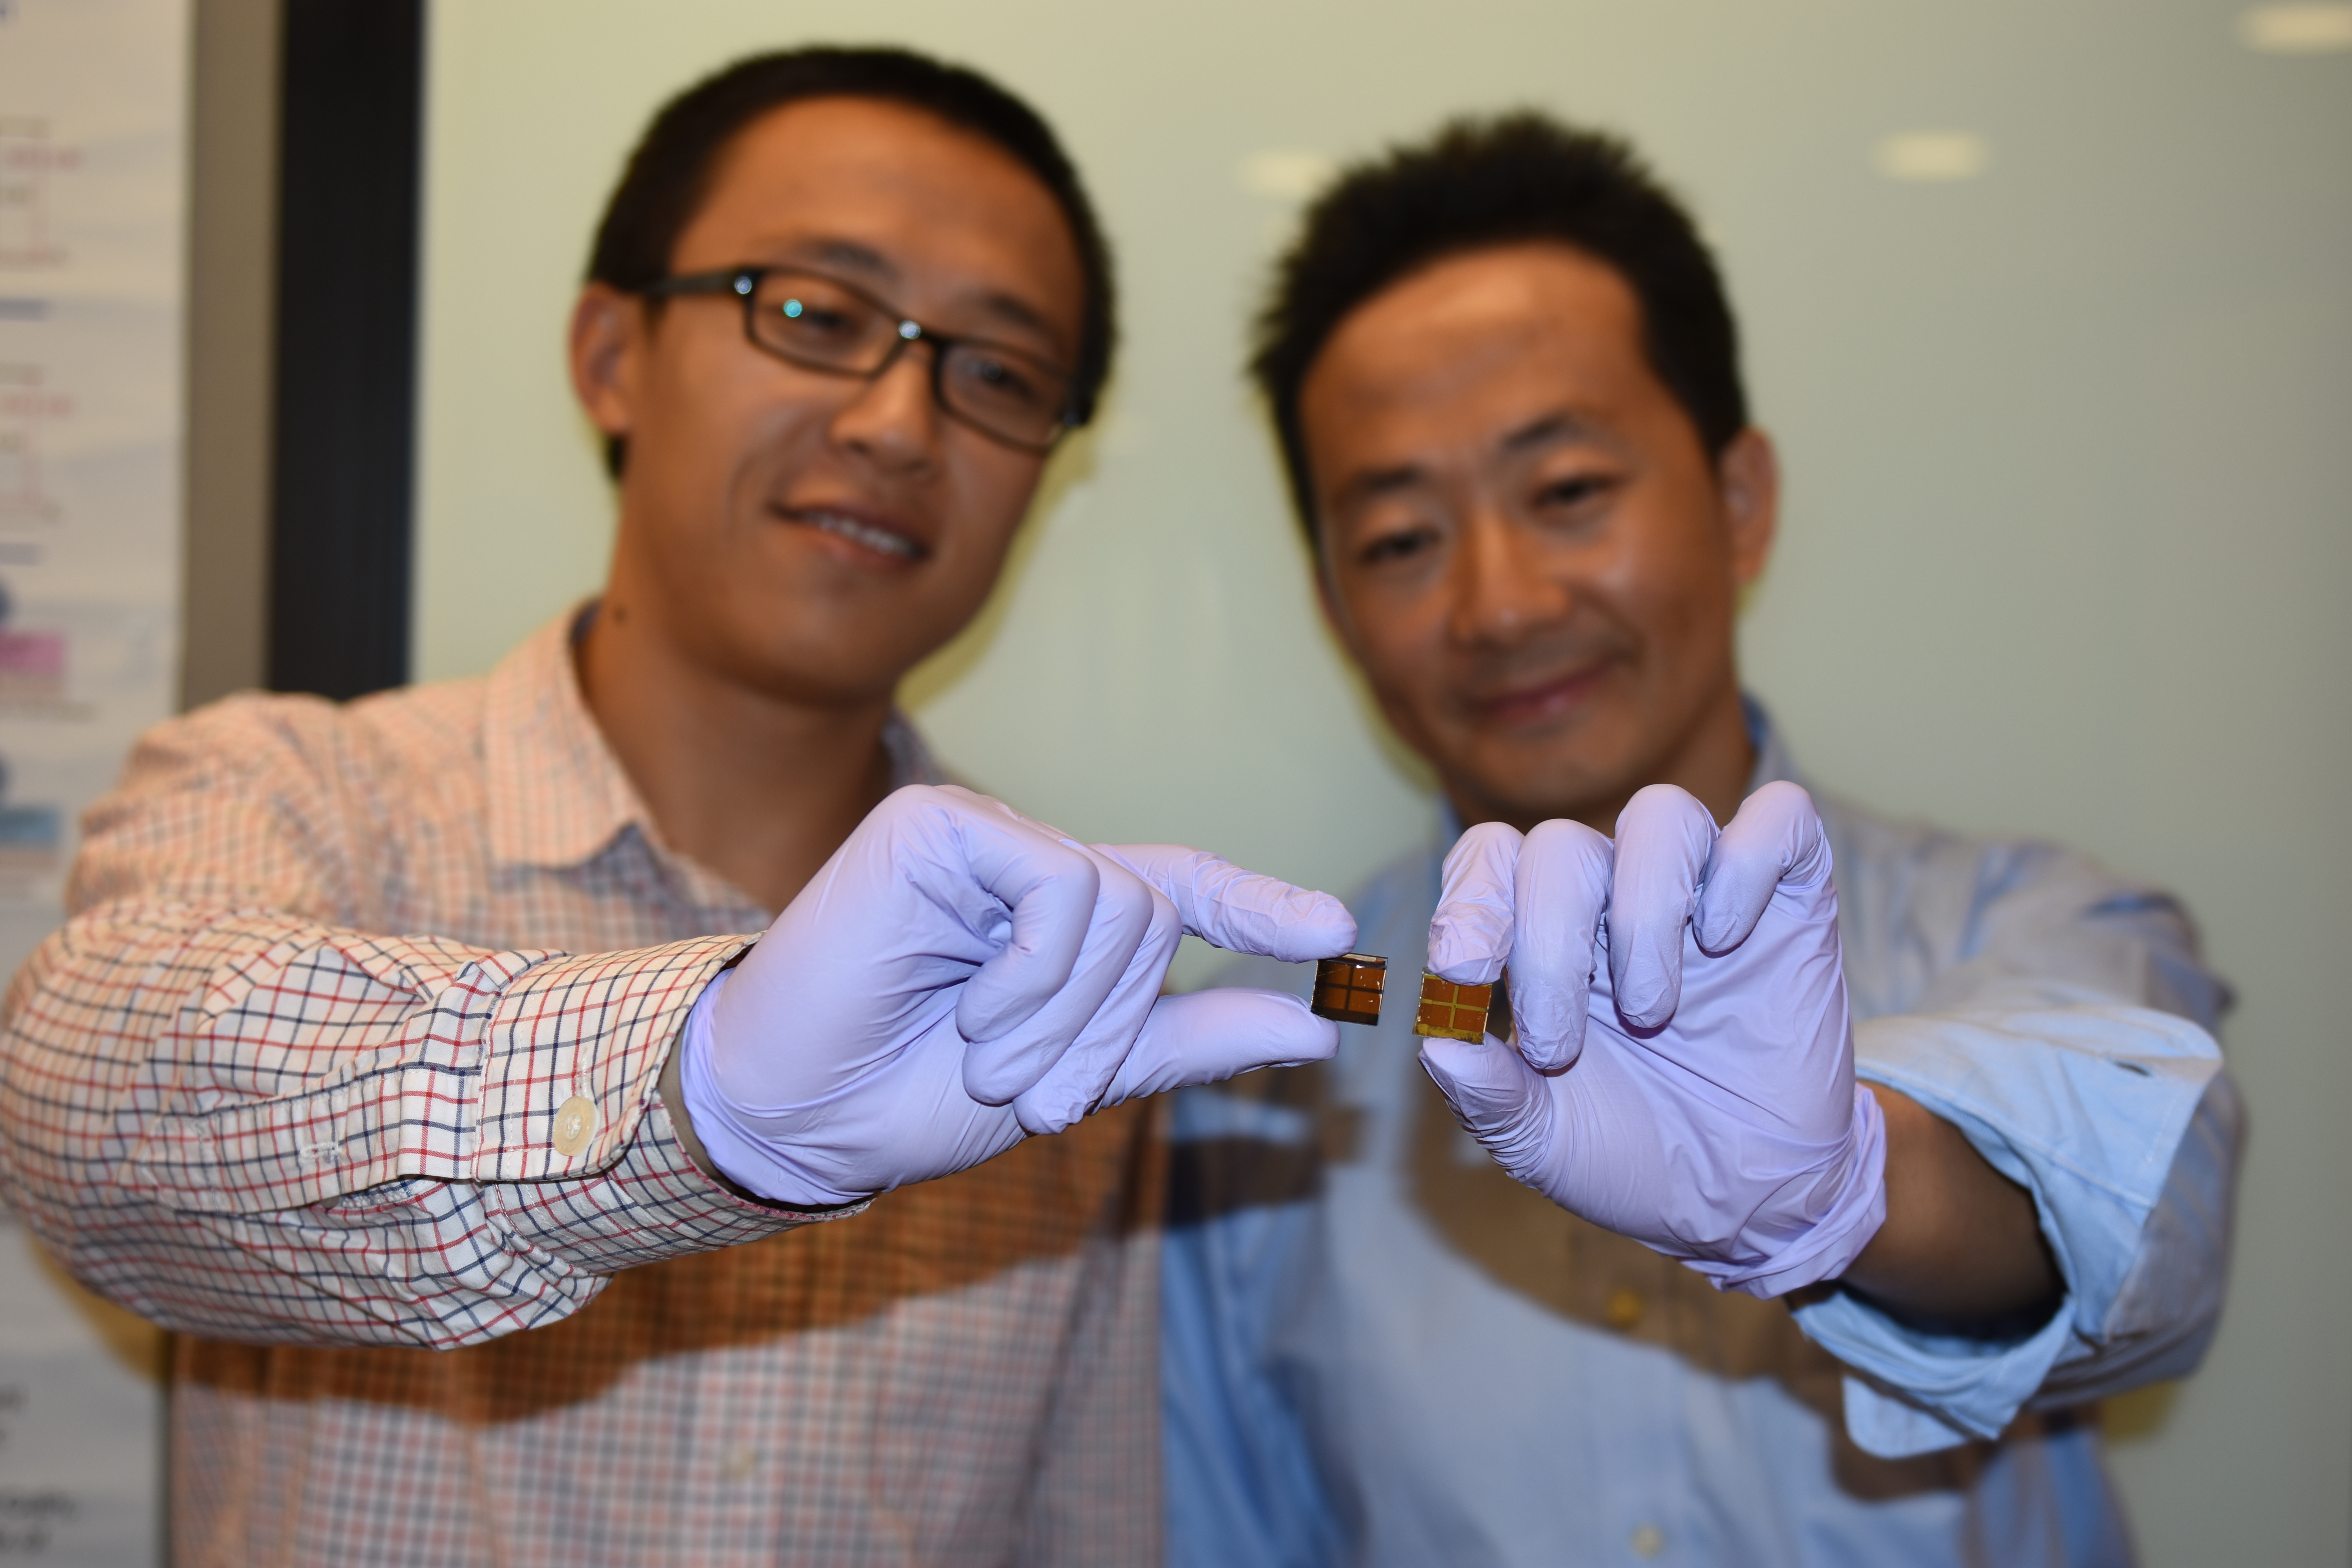 Dr. Yan Jiang holding a freshly made MAPbI3 perovskite solar cell can be seen on the left. MAPbI3 perovskite solar cells degrade, which is marked by a drastic change in color, as seen on the right, held by Dr. Shenghao Wang.